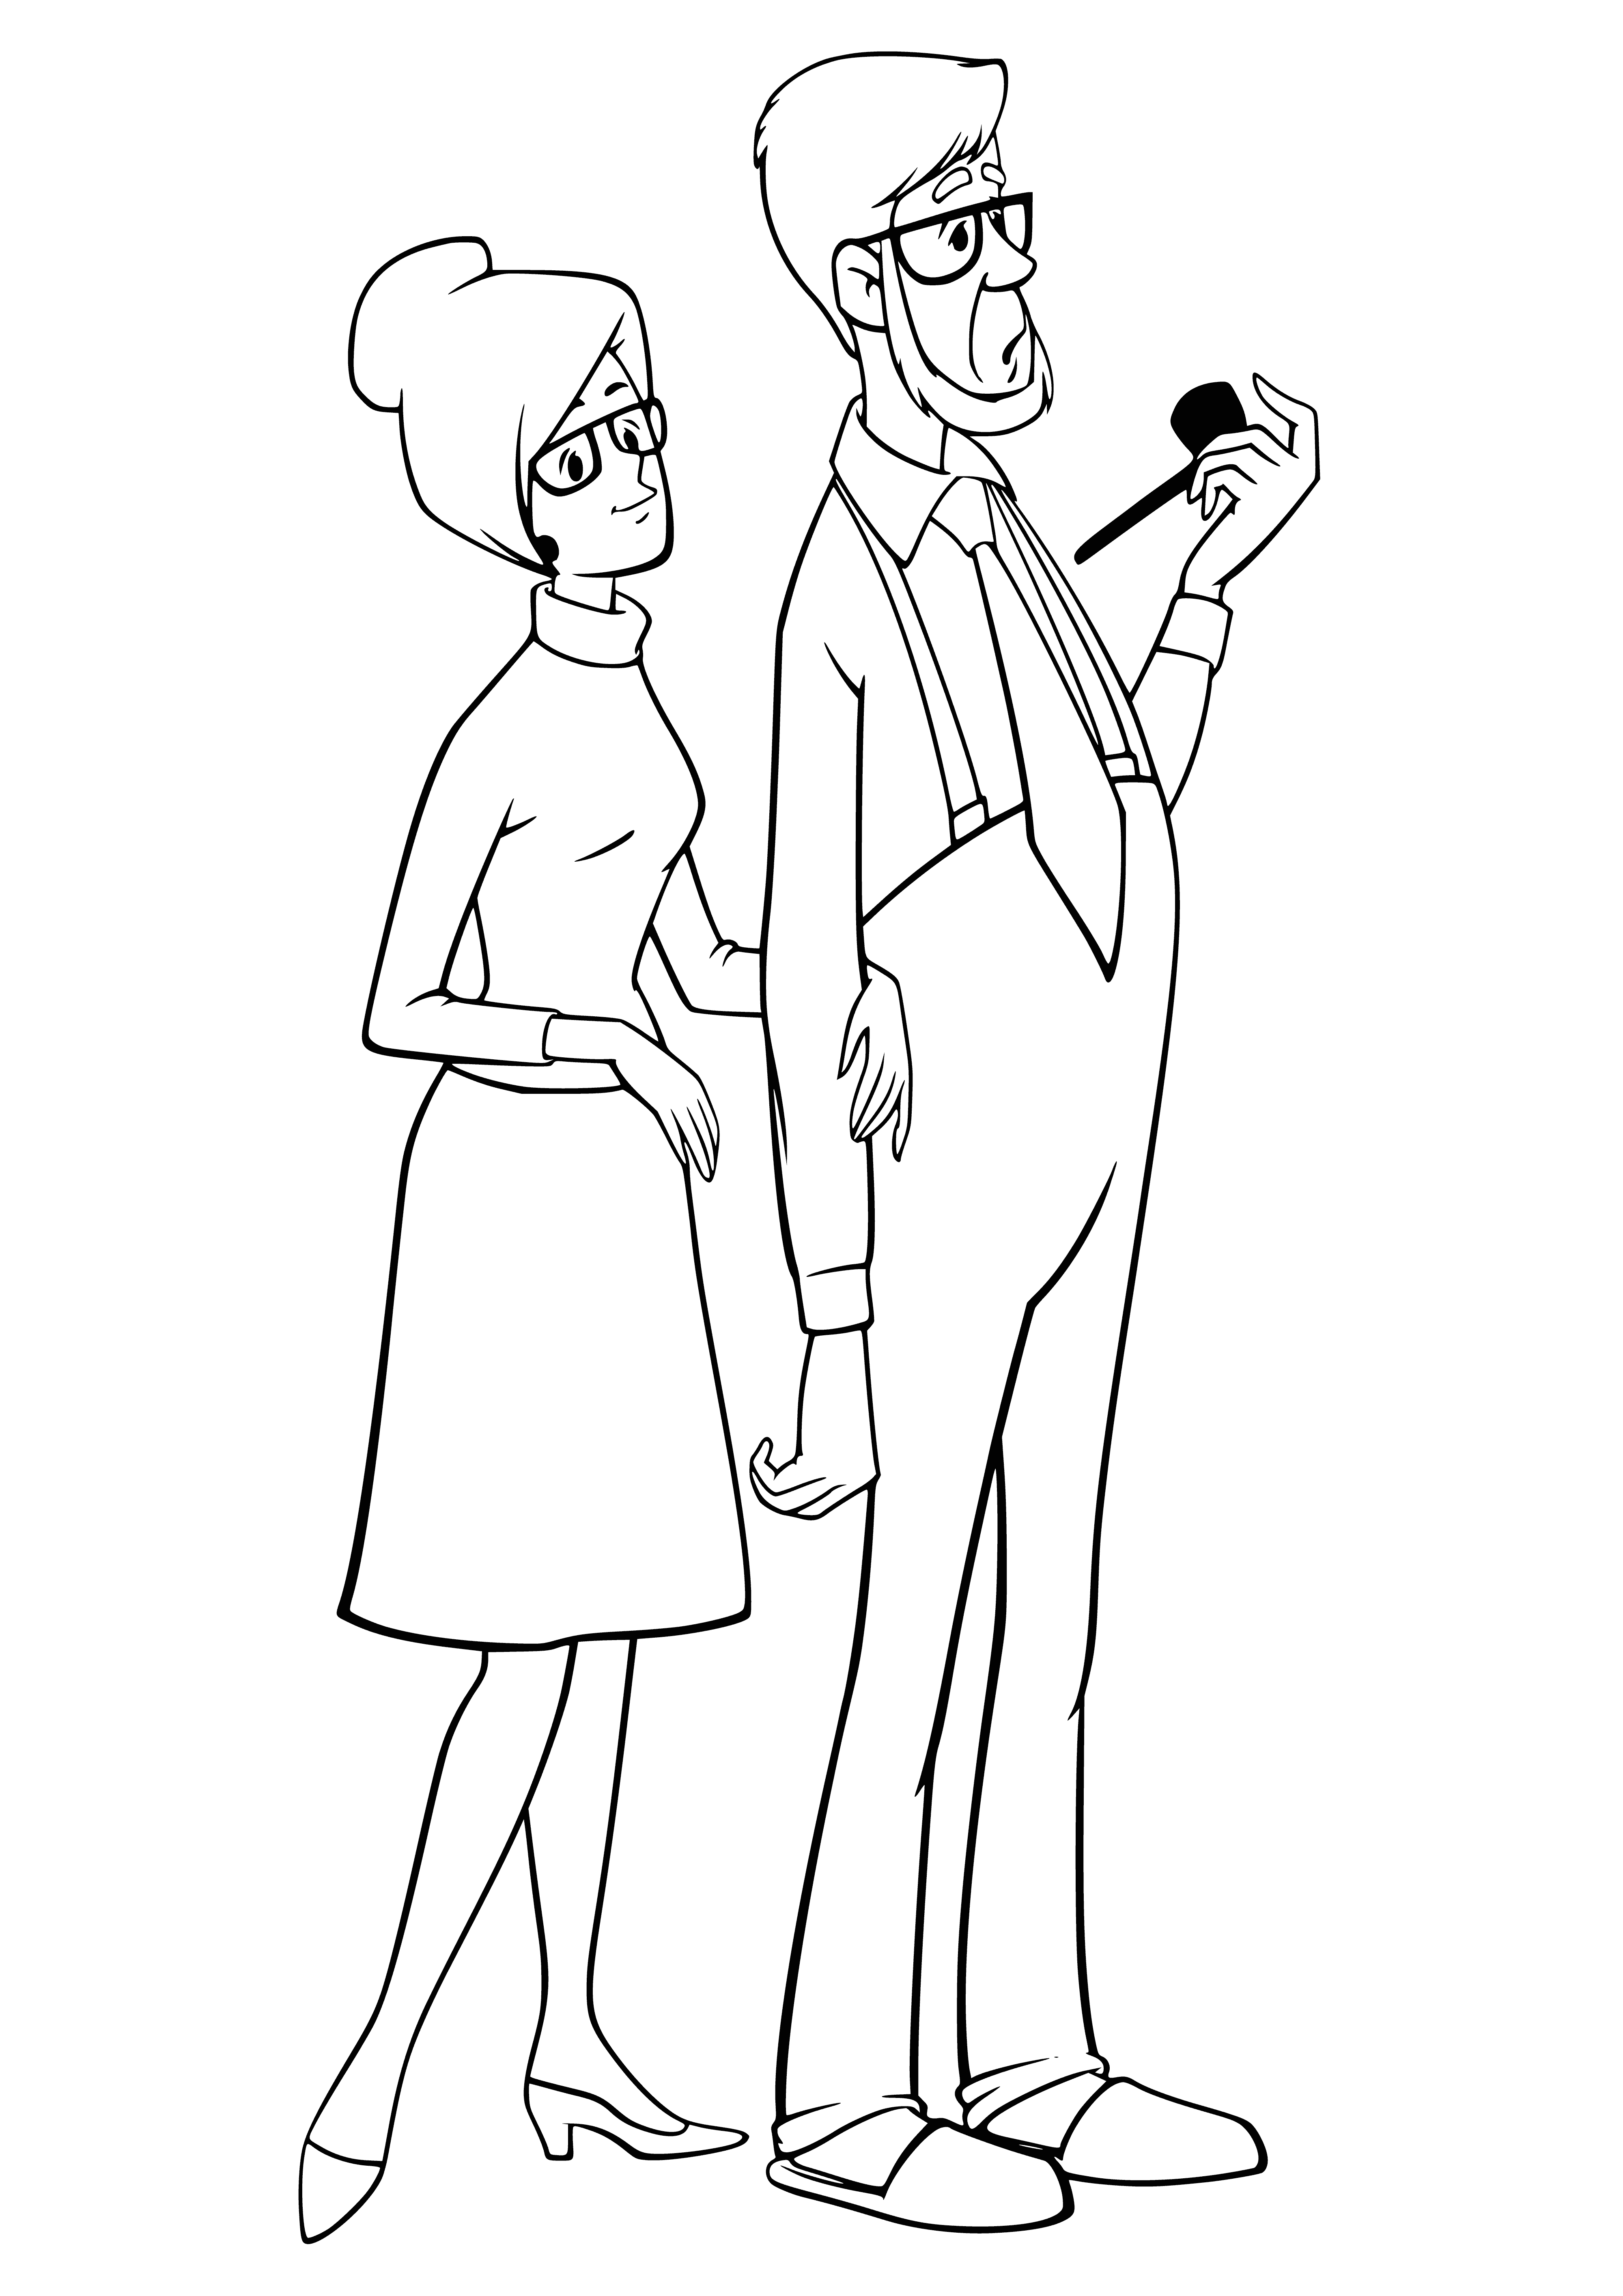 coloring page: Woman embraces baby and man, smiles on all faces.